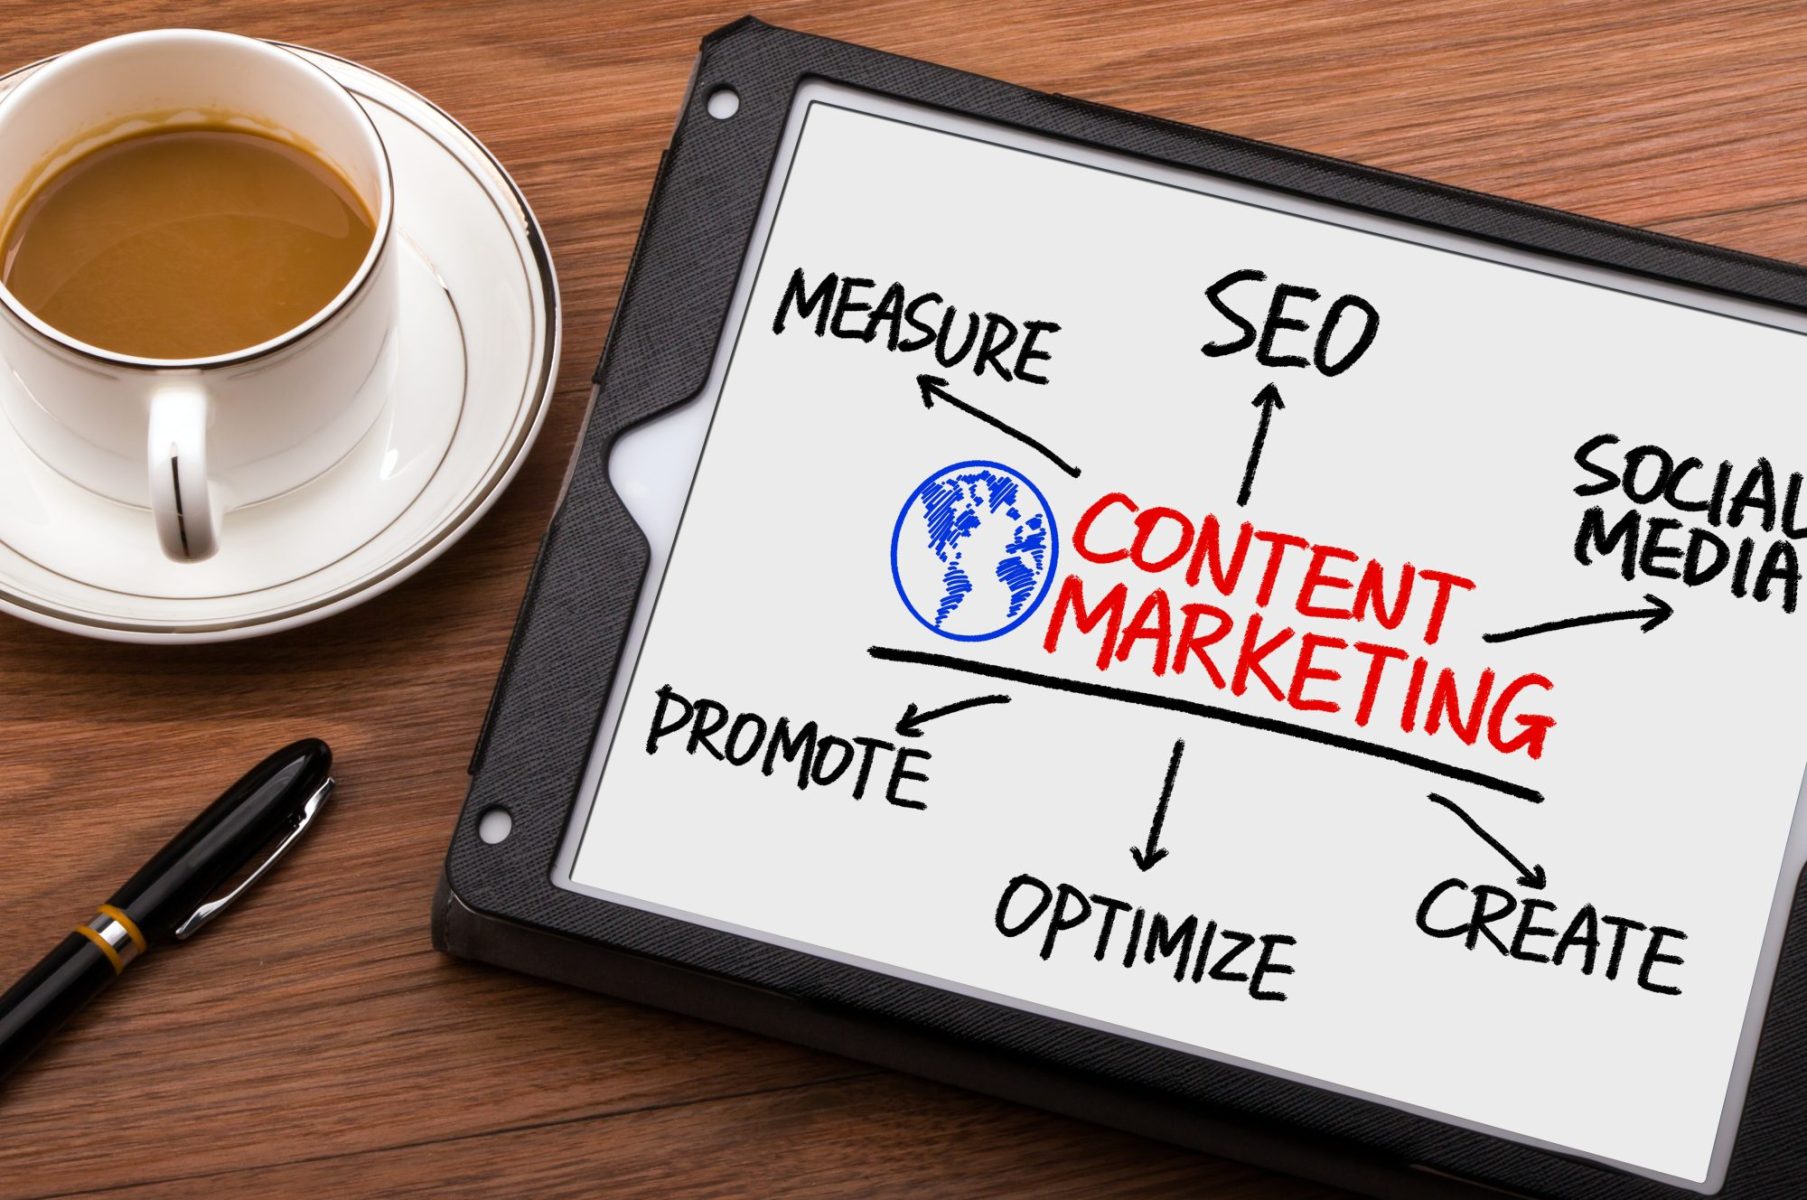 8 Steps to Implement an Effective Content Marketing Strategy